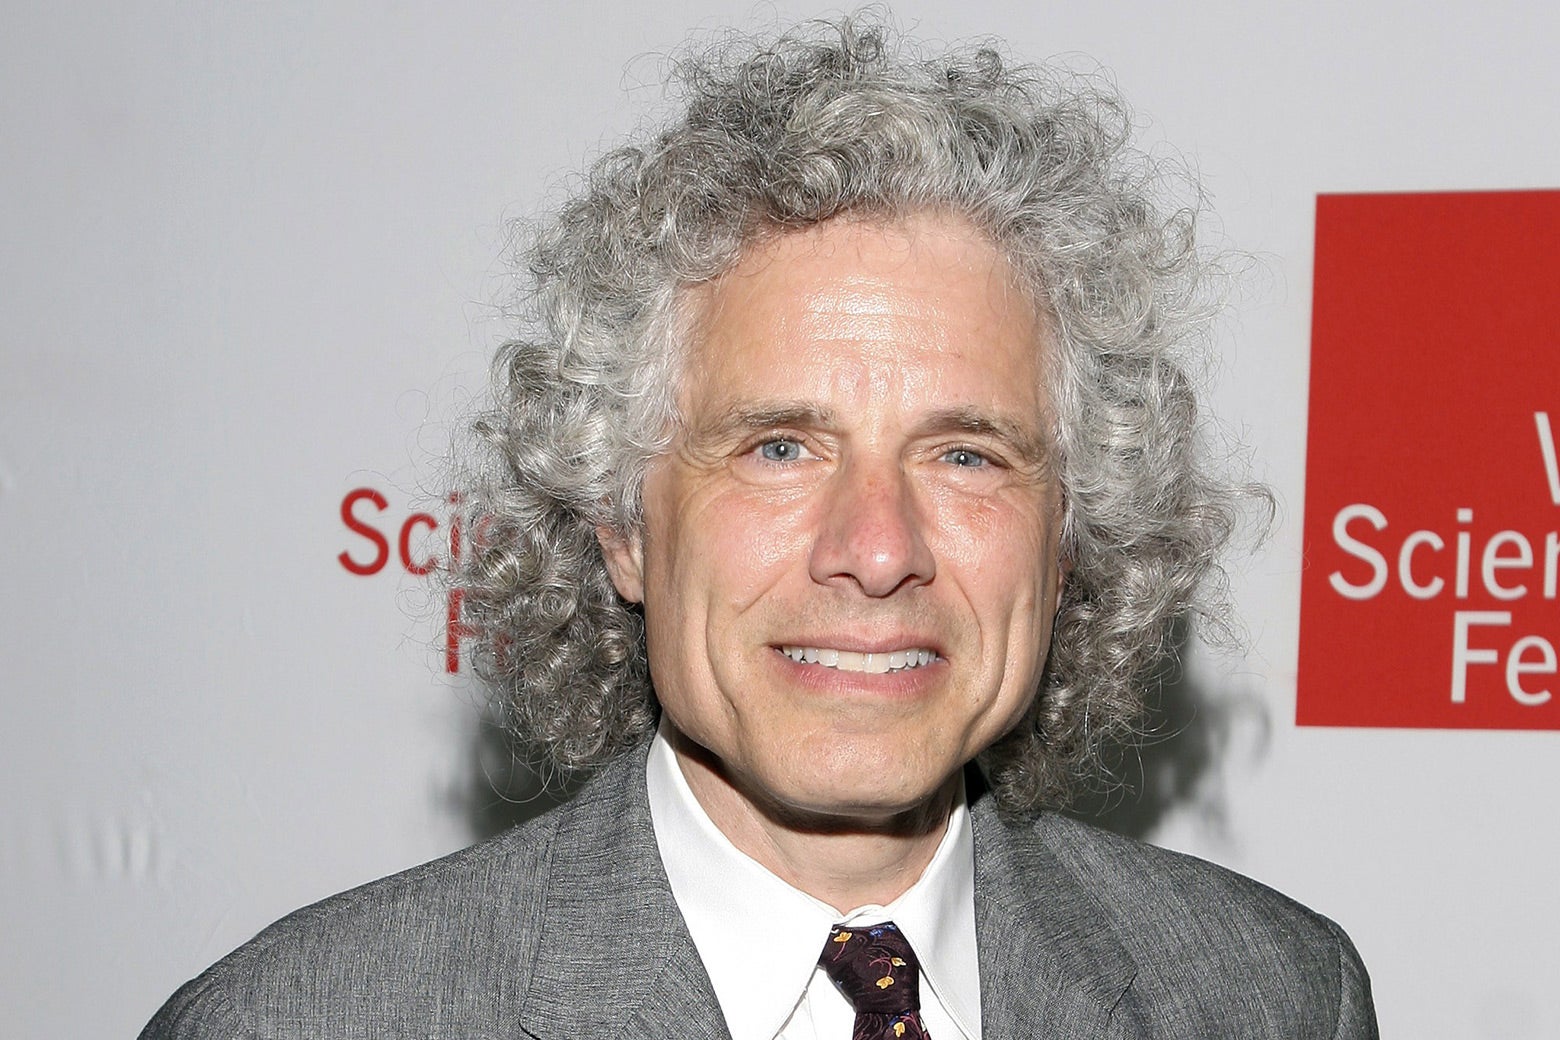 Steven Pinker attends the 2011 World Science Festival opening night gala at Alice Tully Hall on June 1, 2011 in New York City.